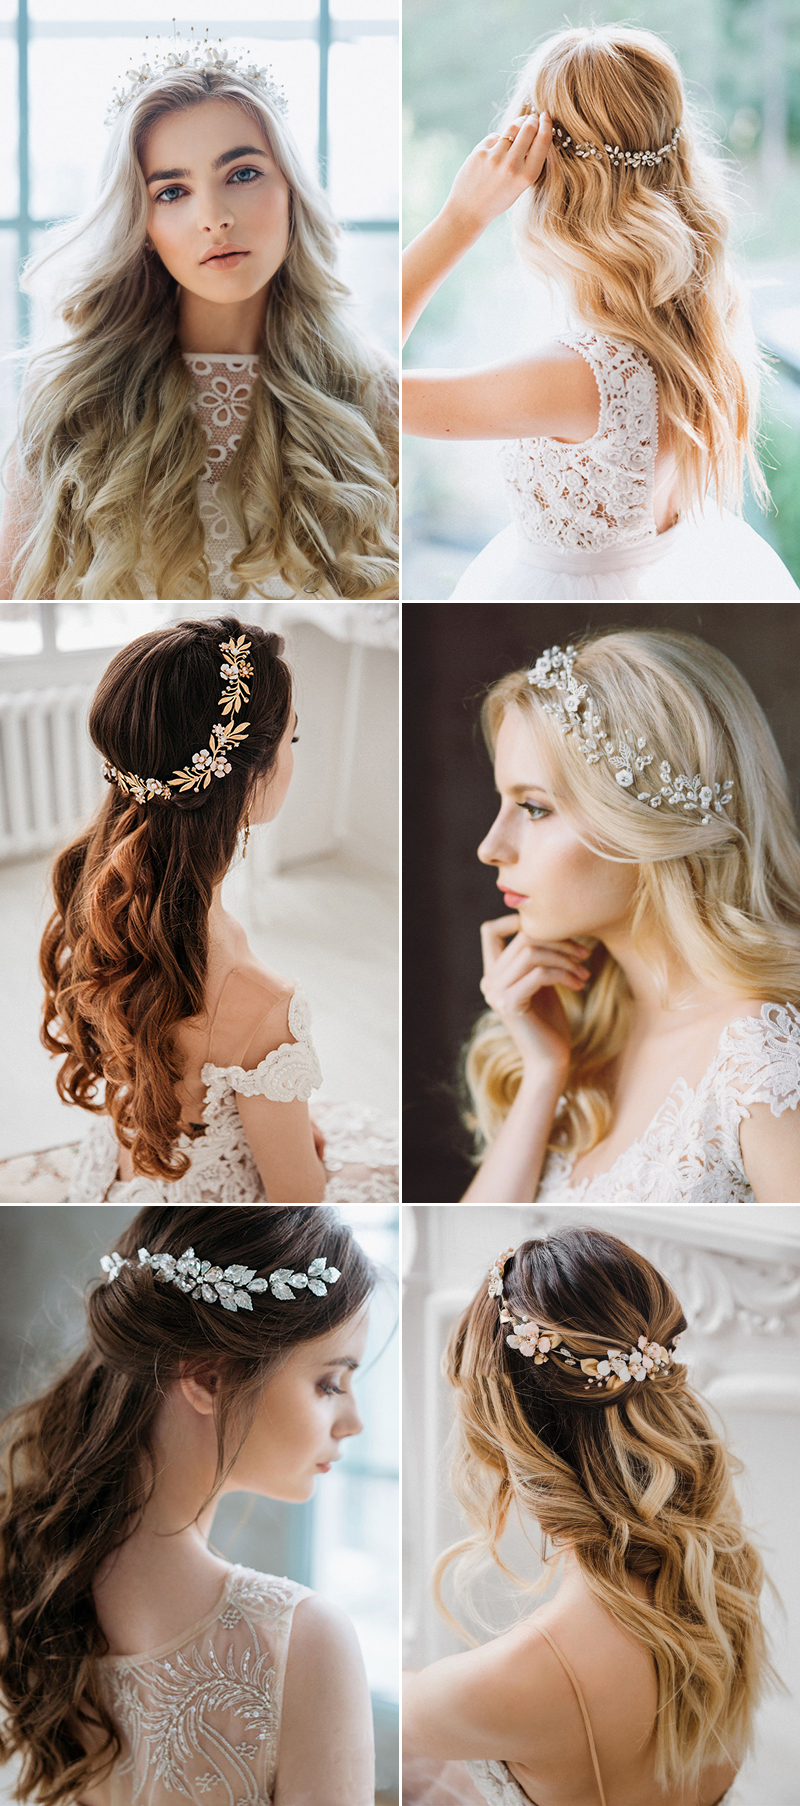 How To Wear Your Hair Down For Your Wedding? 30 Chic Hair Accessories To  Style Free-Flowing Long Hair! - Praise Wedding